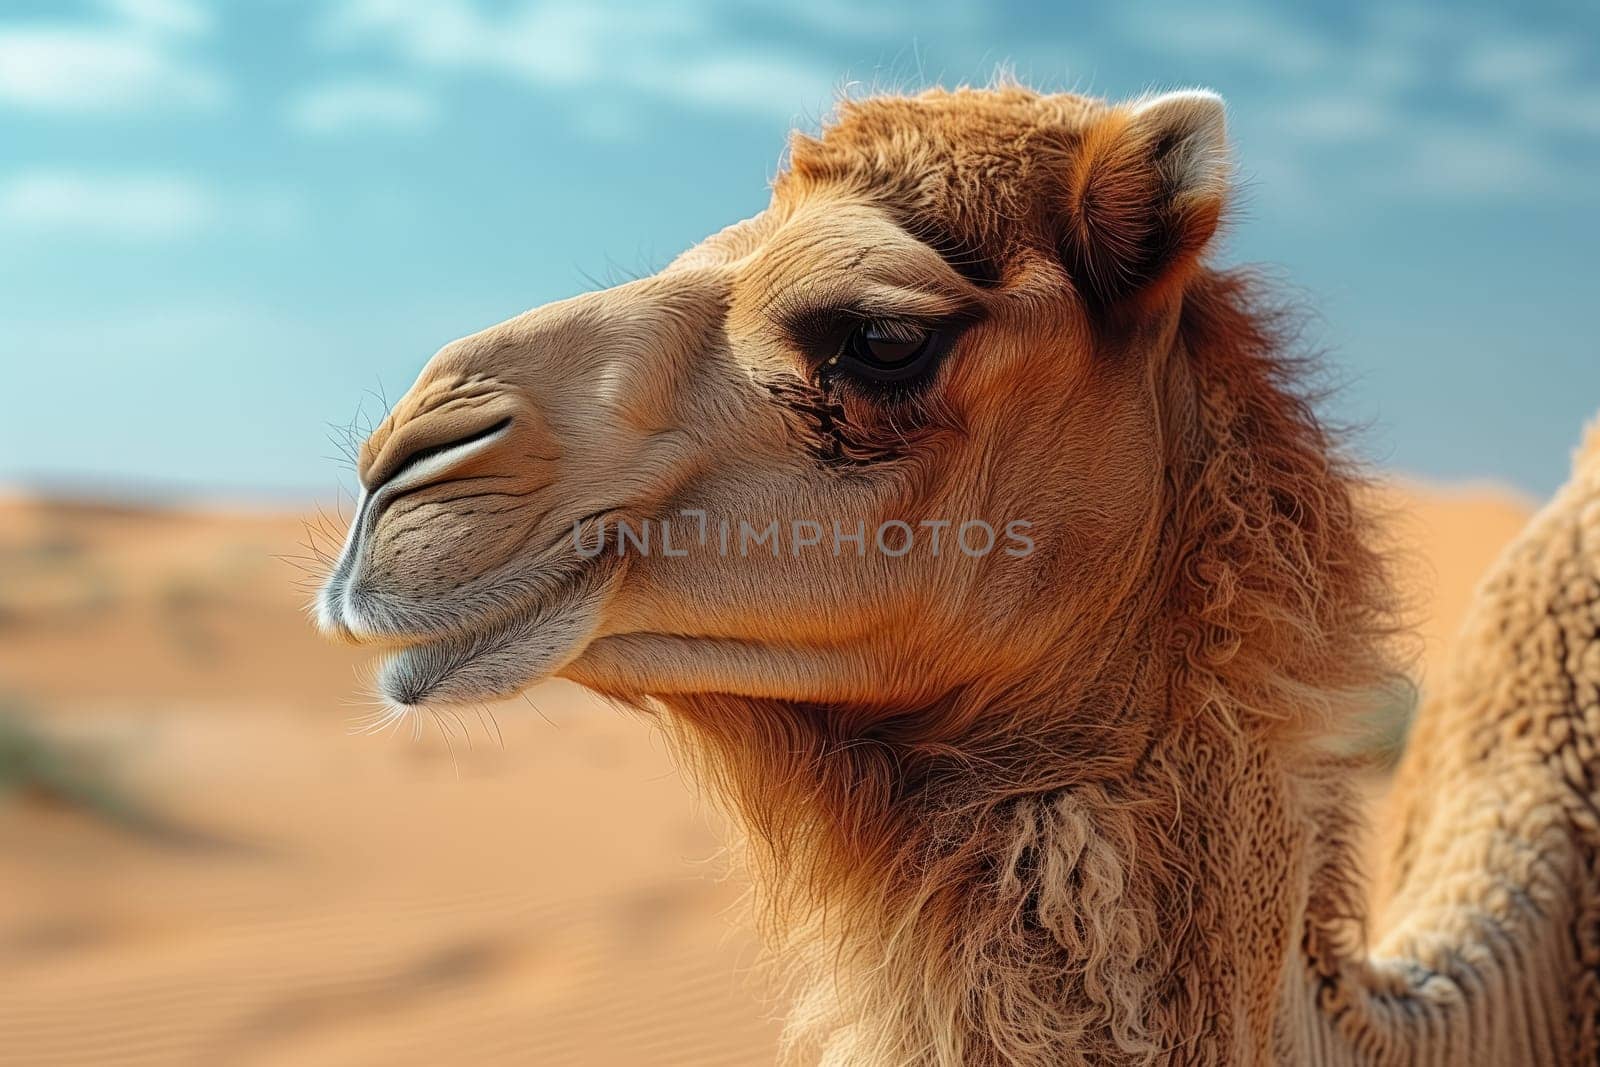 Closeup shot of a camels eye in the desert landscape by richwolf